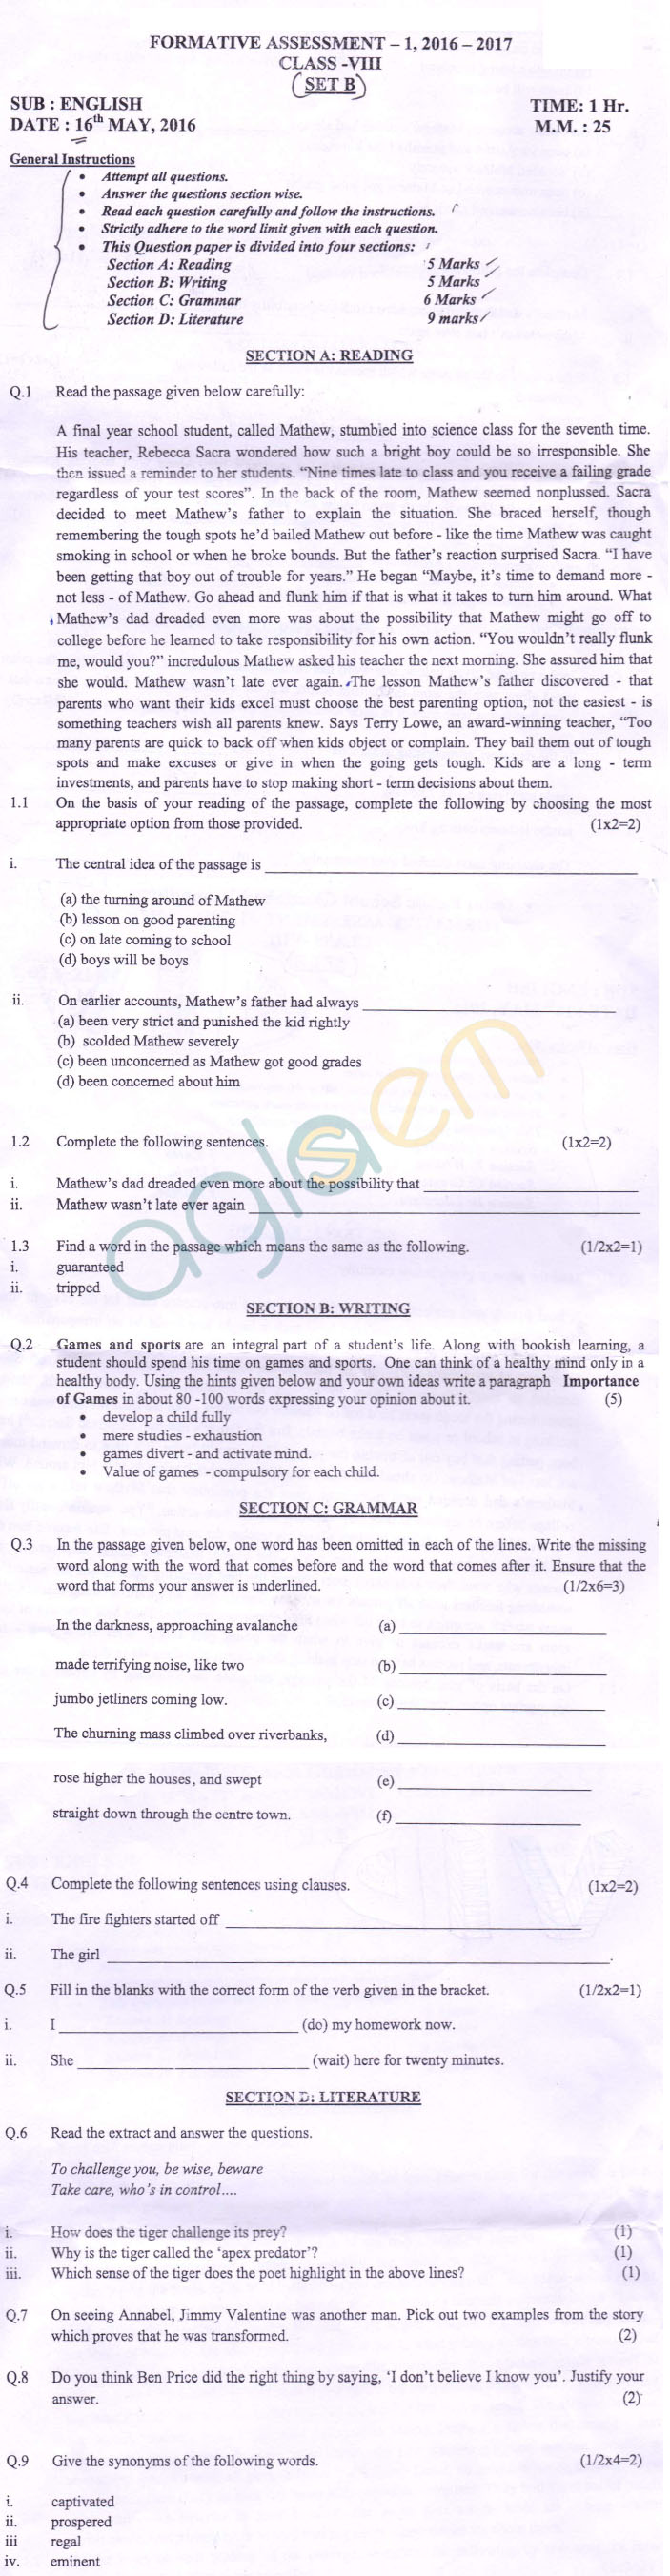 CBSE Class 8 Formative Assessment I Question Paper